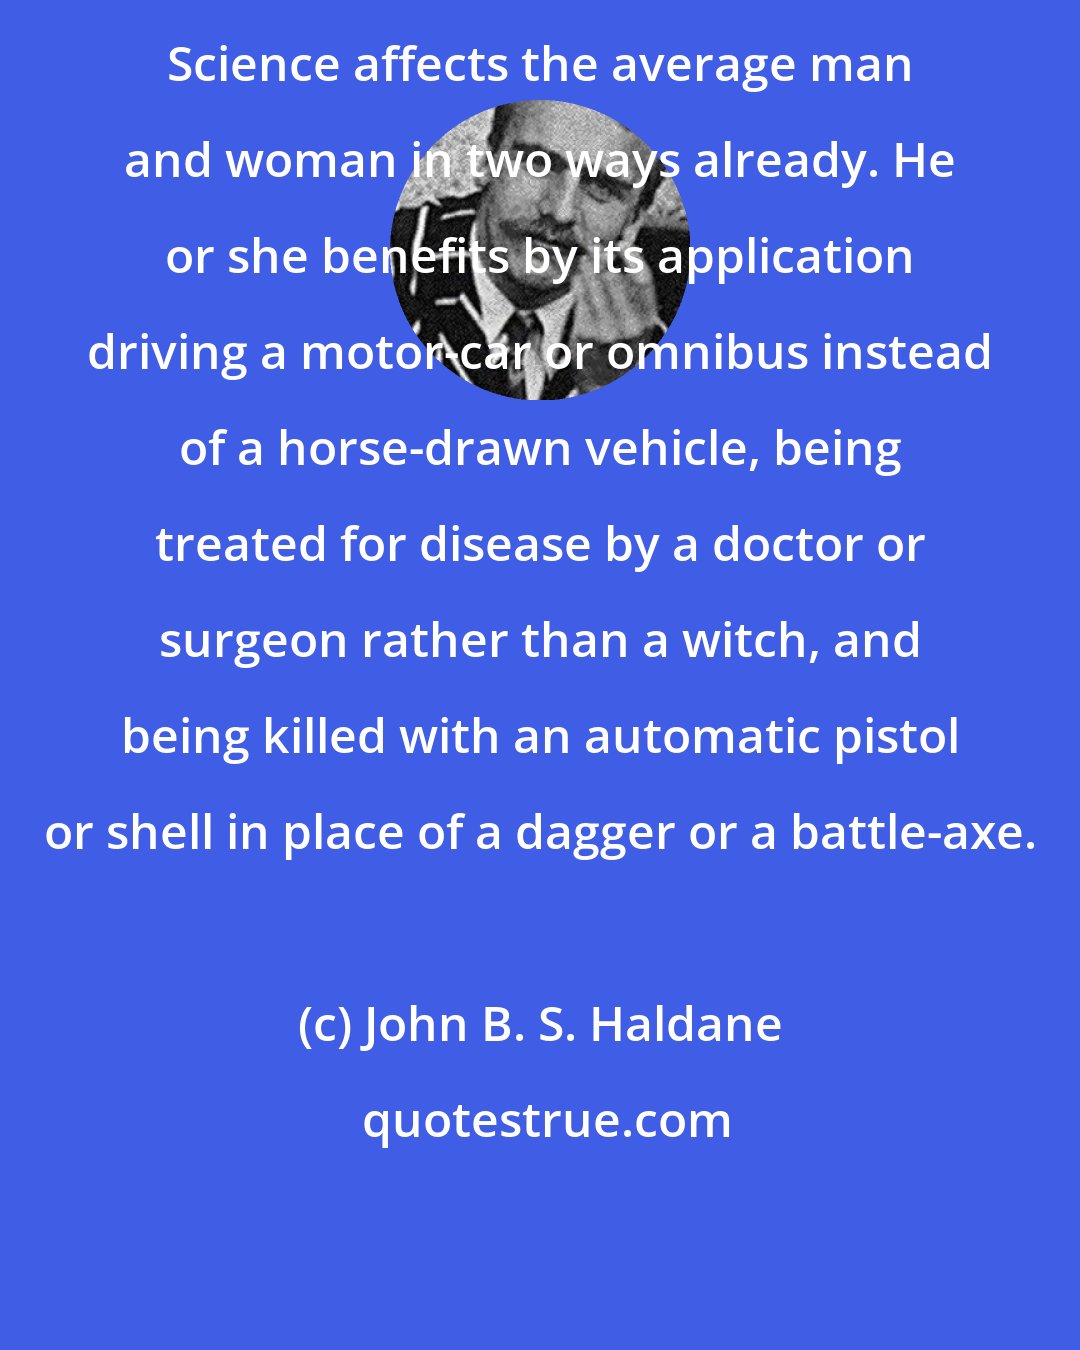 John B. S. Haldane: Science affects the average man and woman in two ways already. He or she benefits by its application driving a motor-car or omnibus instead of a horse-drawn vehicle, being treated for disease by a doctor or surgeon rather than a witch, and being killed with an automatic pistol or shell in place of a dagger or a battle-axe.